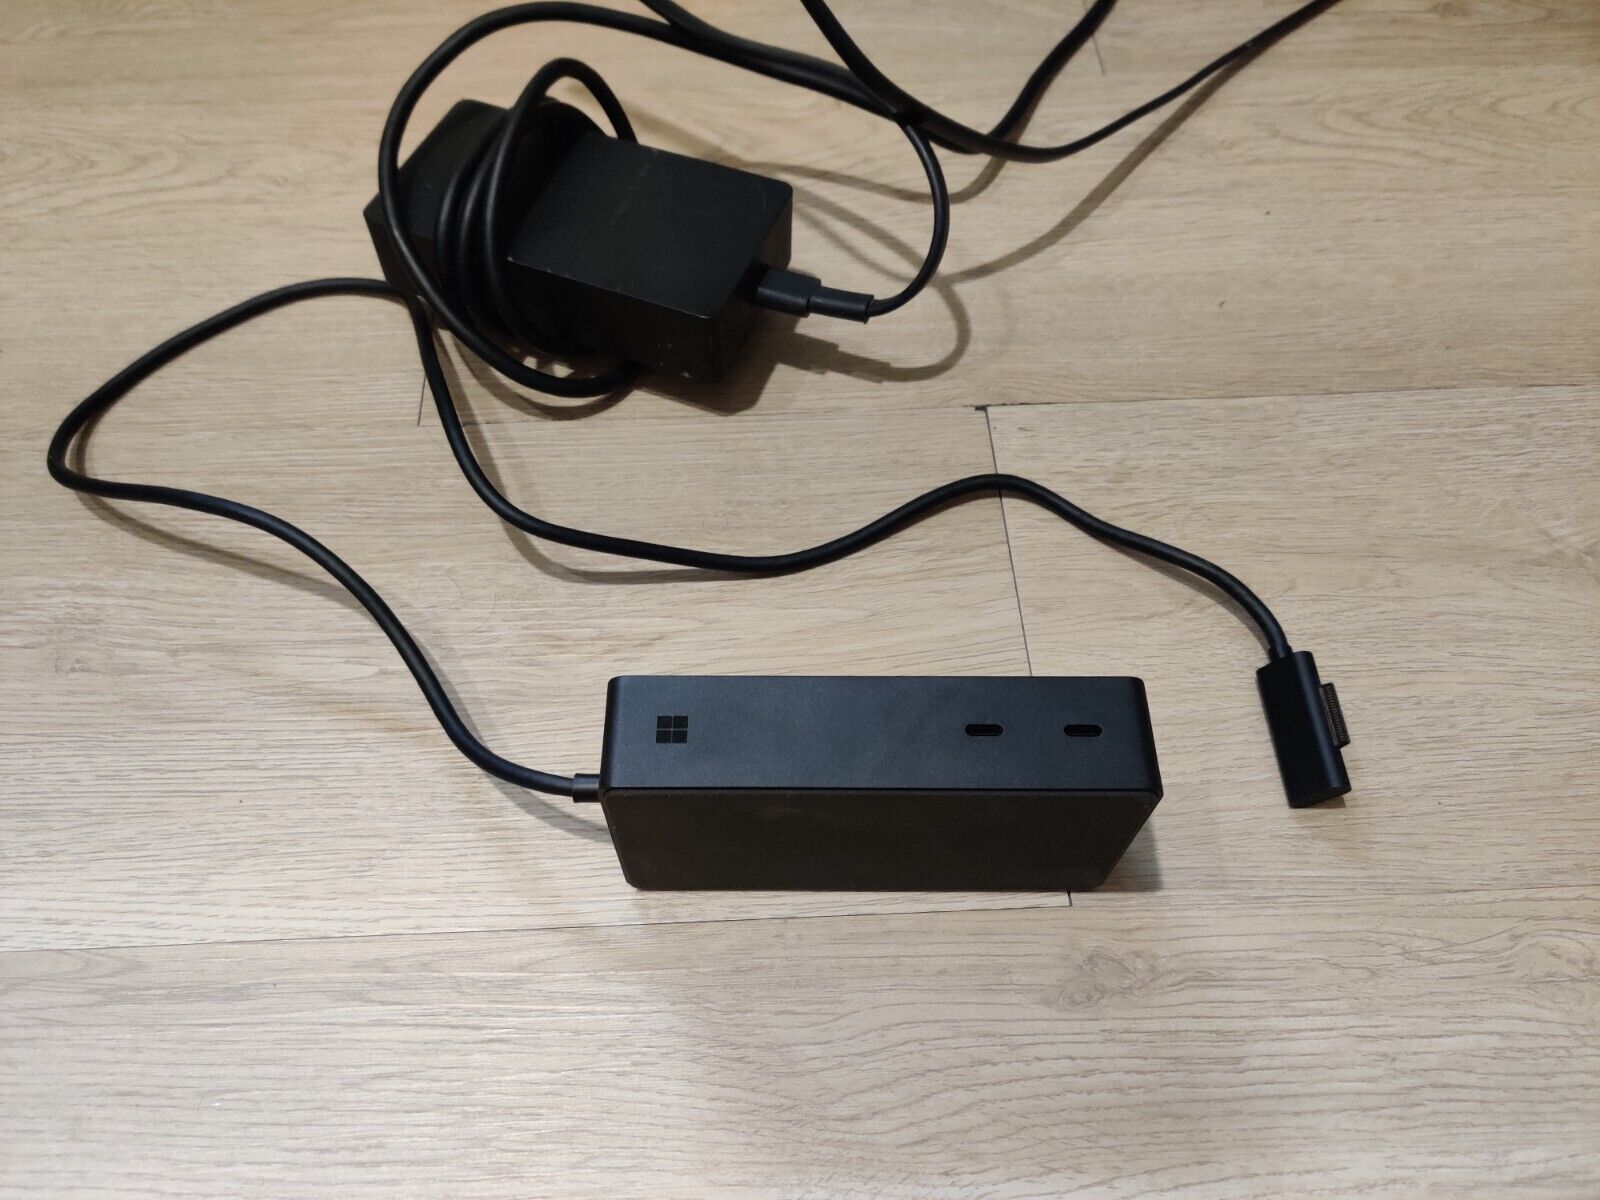 Microsoft Surface Dock 2 Docking Station, Black USB C - Model 1917 With Charger 